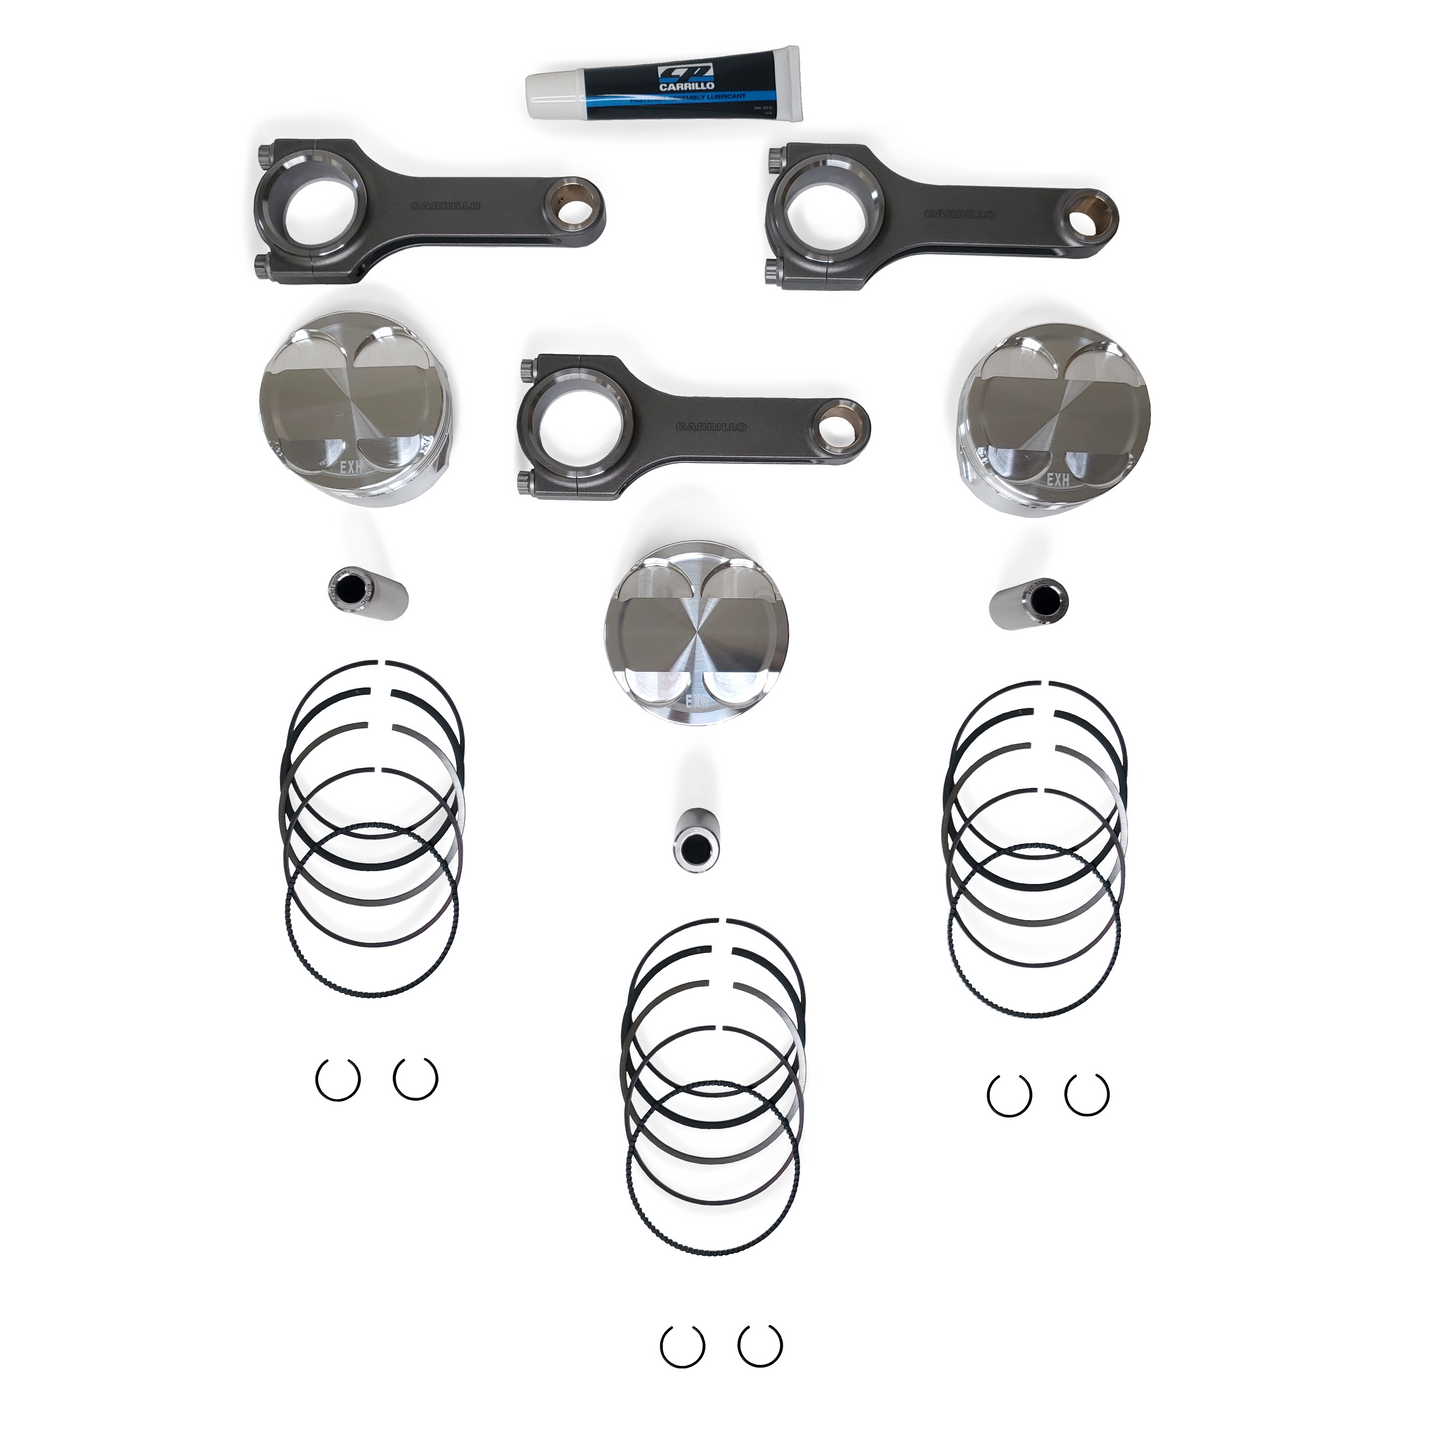 CP-Carrillo 10.5:1 Turbo Pistons and Connecting Rods for Yamaha